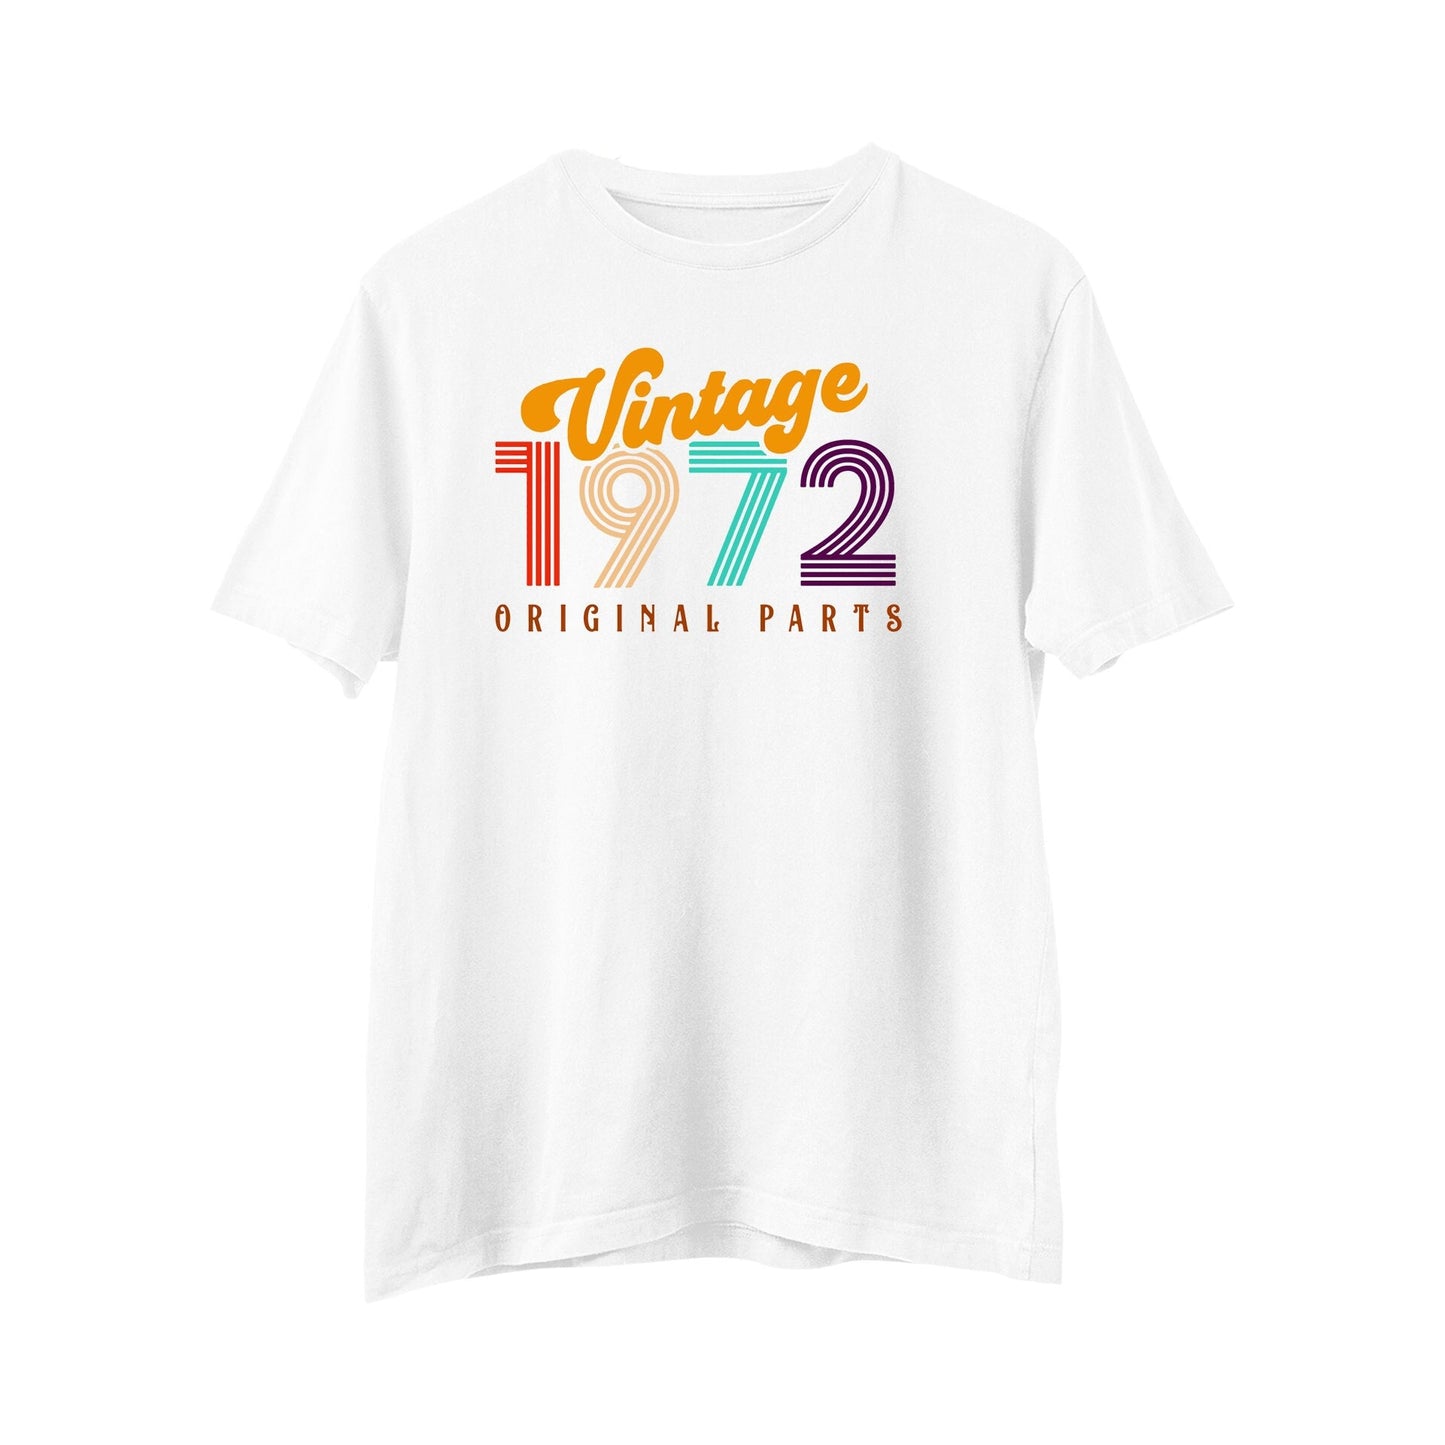 Vintage 1972 T-Shirt, 50th Birthday T Shirt, 1972 Birthday Gift,  50th Birthday Gift , Party 50 Years Old Tee Limited Edition, Novelty Shirt